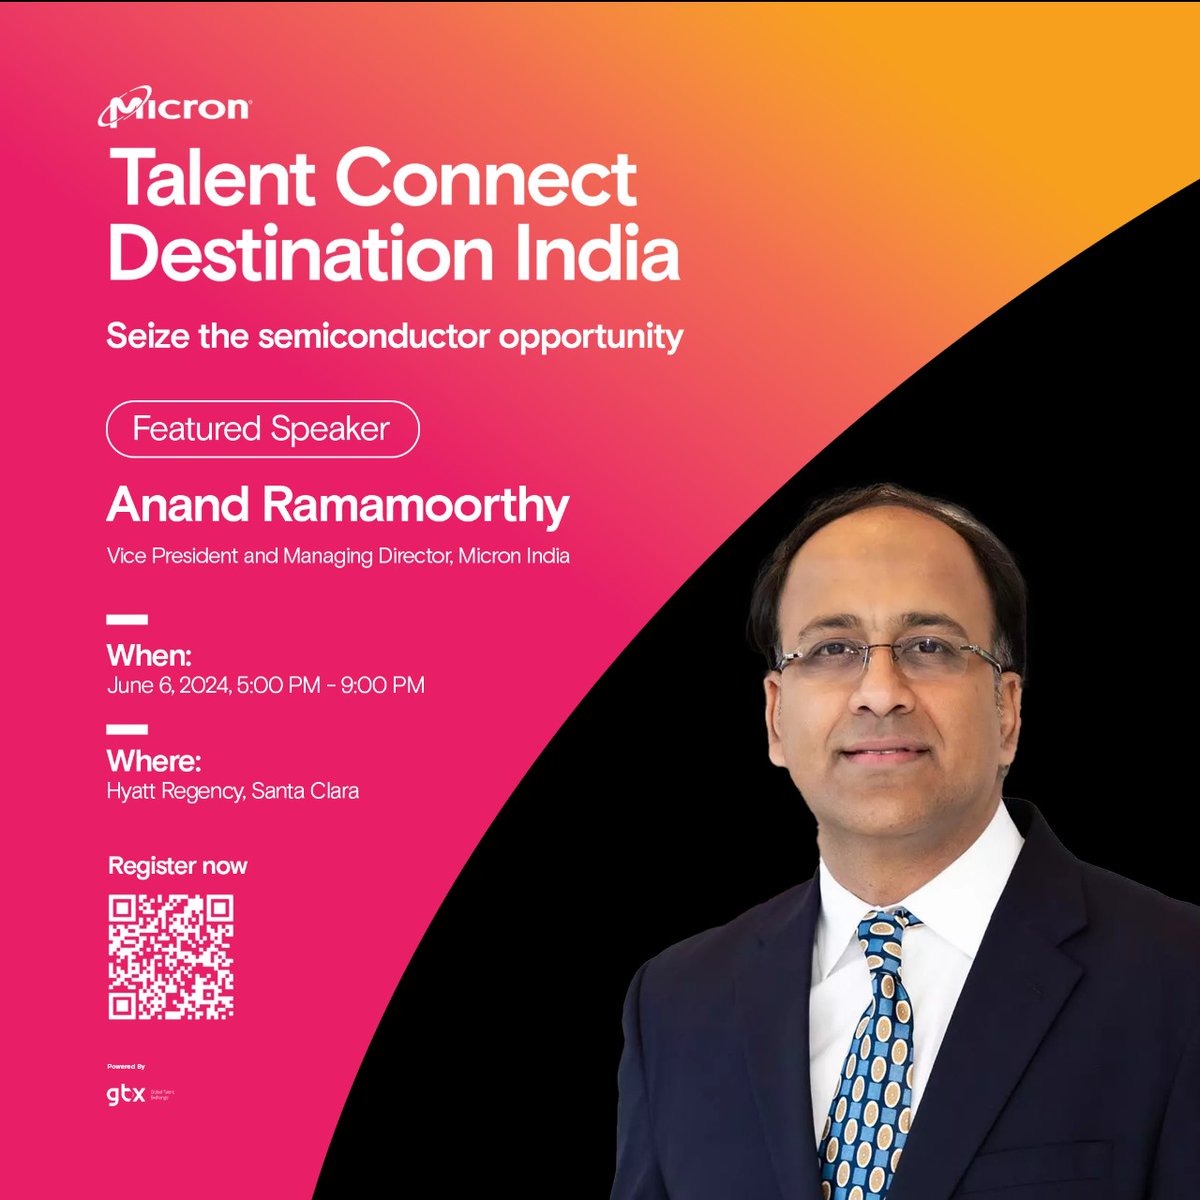 Announcing Anand Ramamoorthy as a featured speaker at ‘Micron Talent Connect - Destination India’ 🙌🏻

Come, engage and learn from his experiences, and gain invaluable insights into what @MicronTech is all about

Don’t miss out

Register now!
microntalentconnect.globaltalex.com